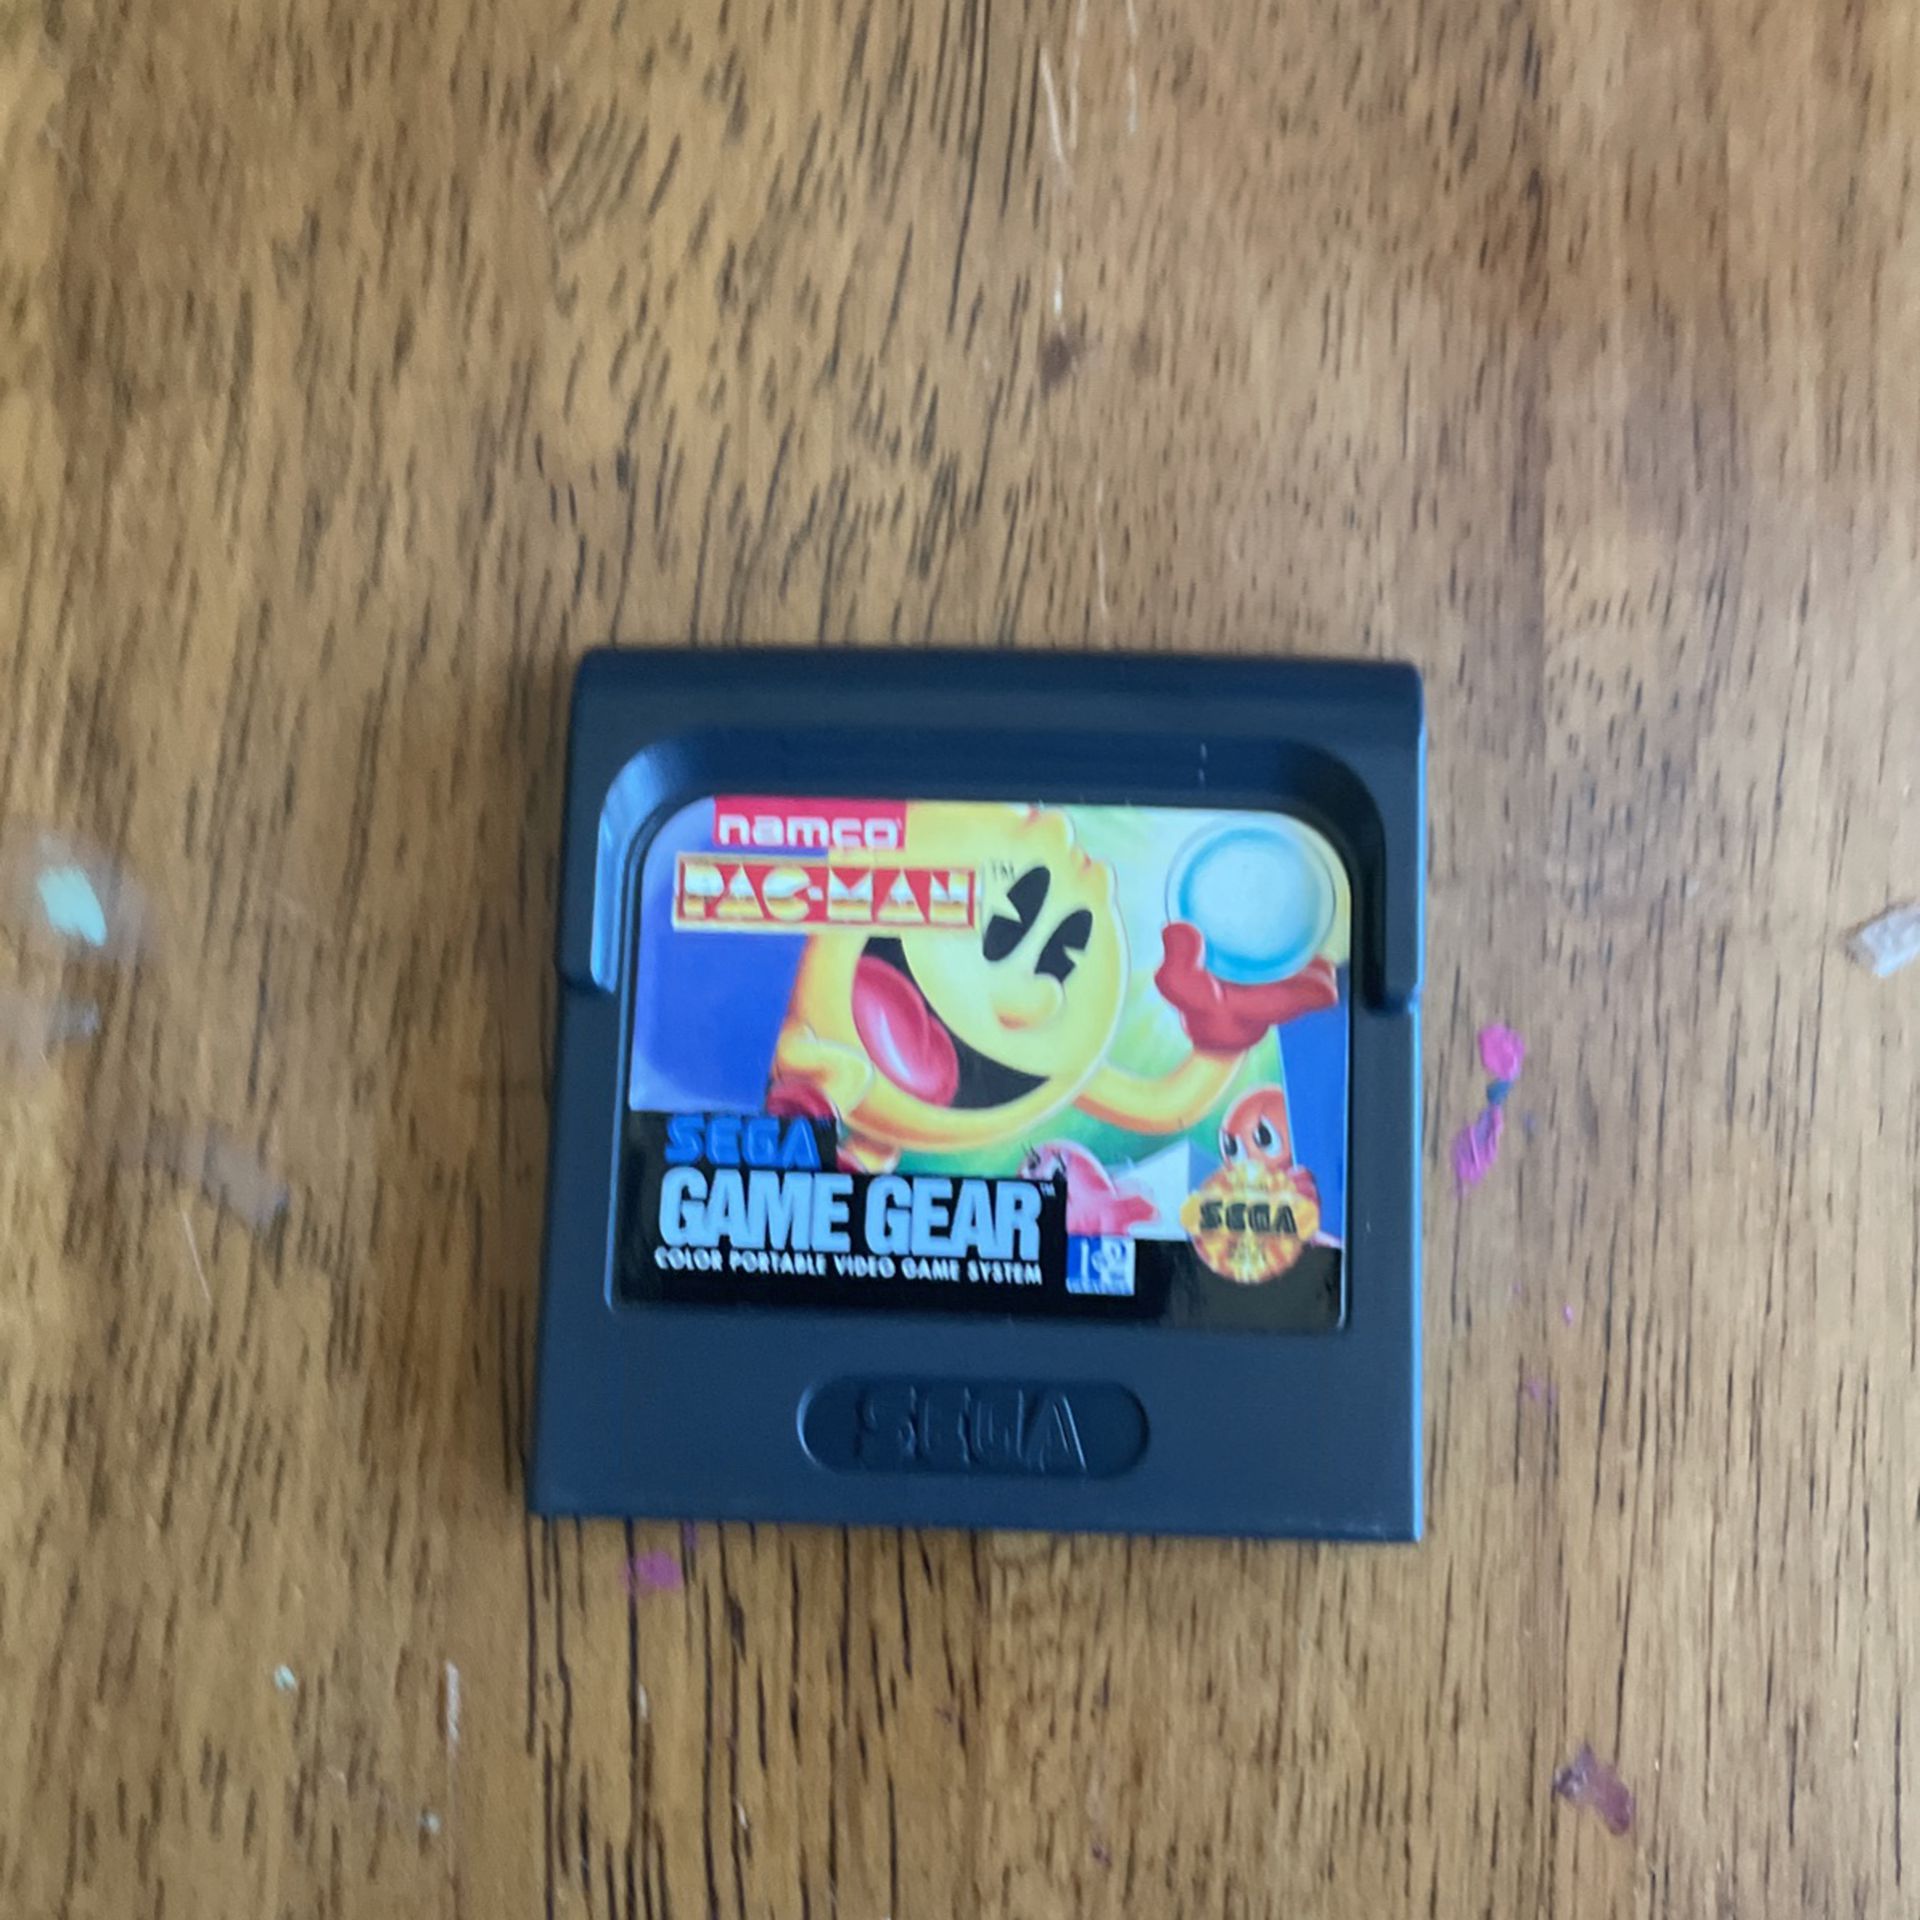 Sega Game Gear PAC Mam Game With Case And Manual